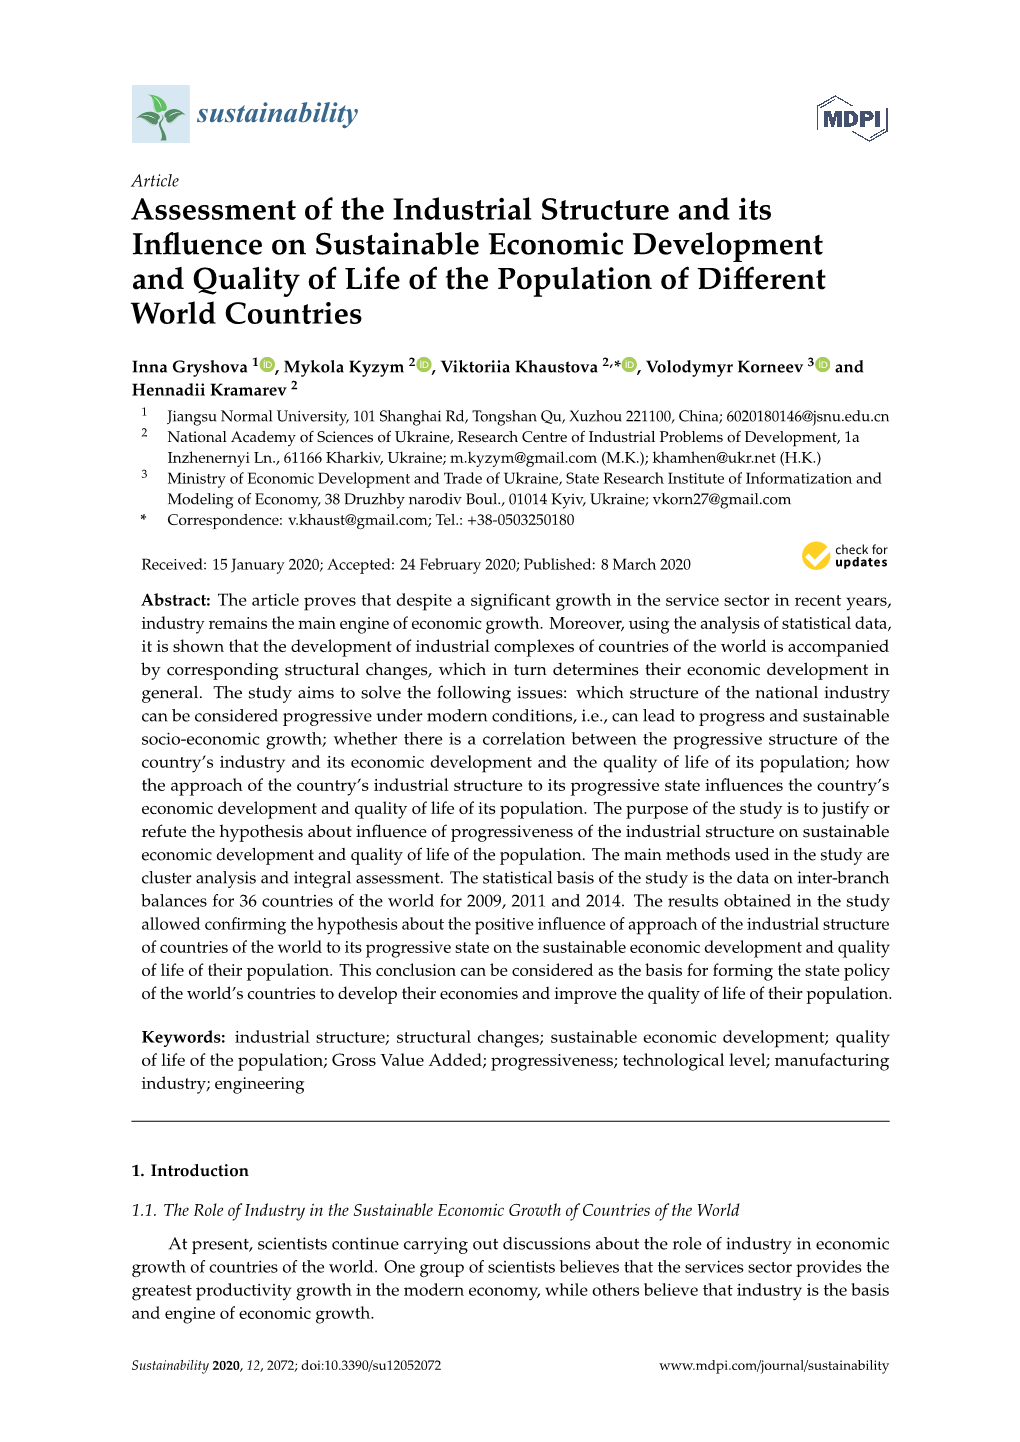 Assessment of the Industrial Structure and Its Influence on Sustainable